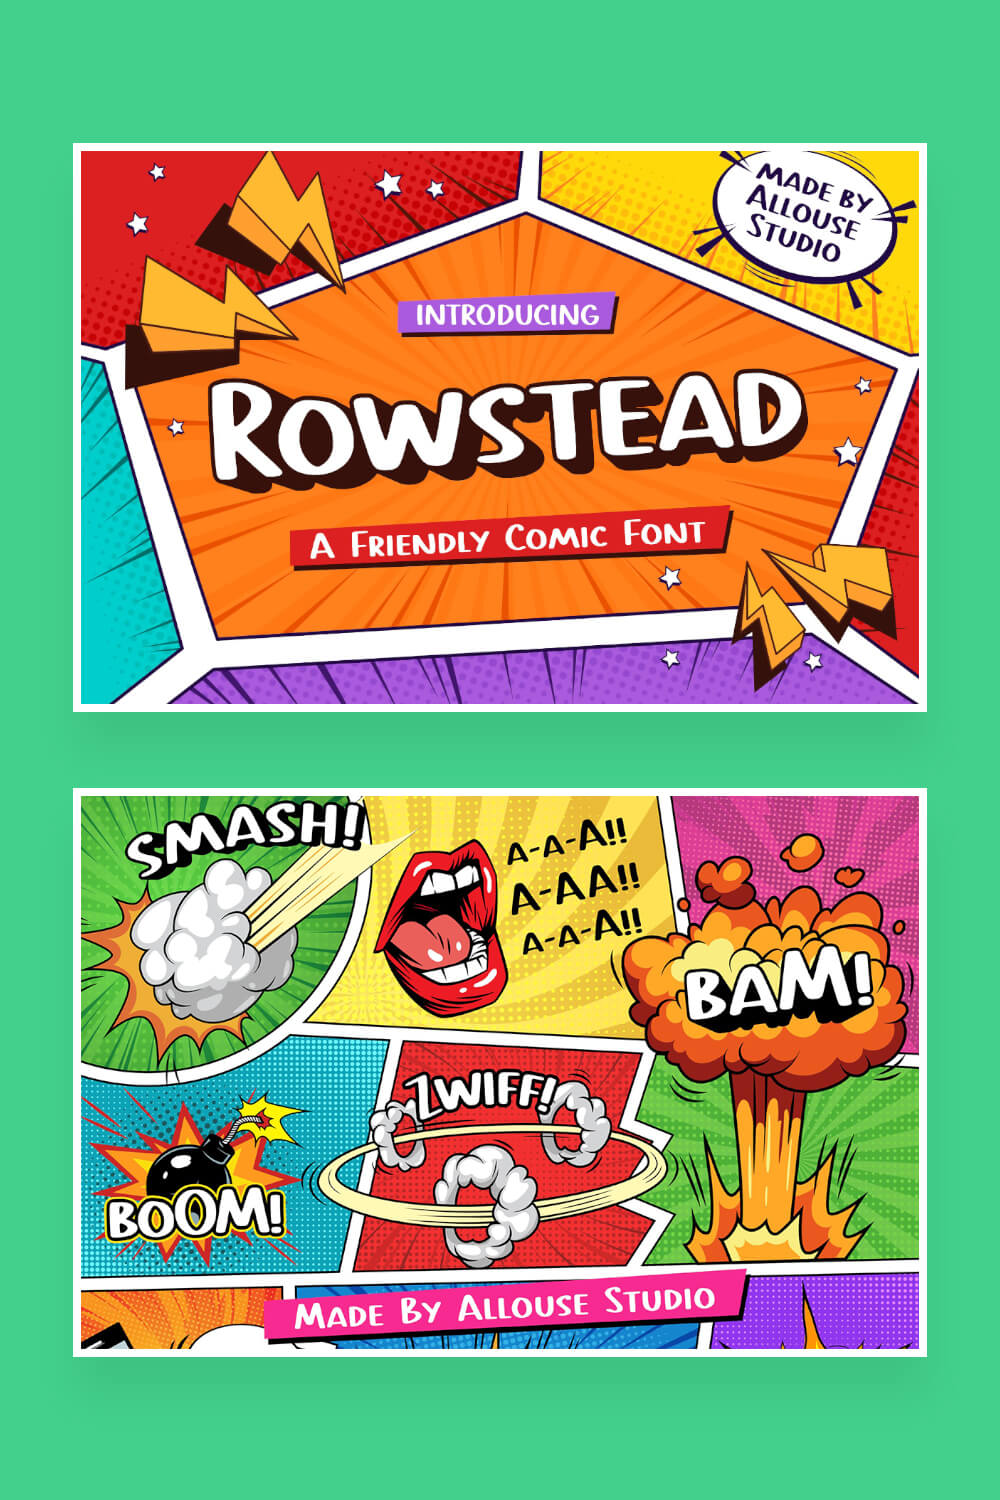 rowstead a friendly comic font pinterest image.